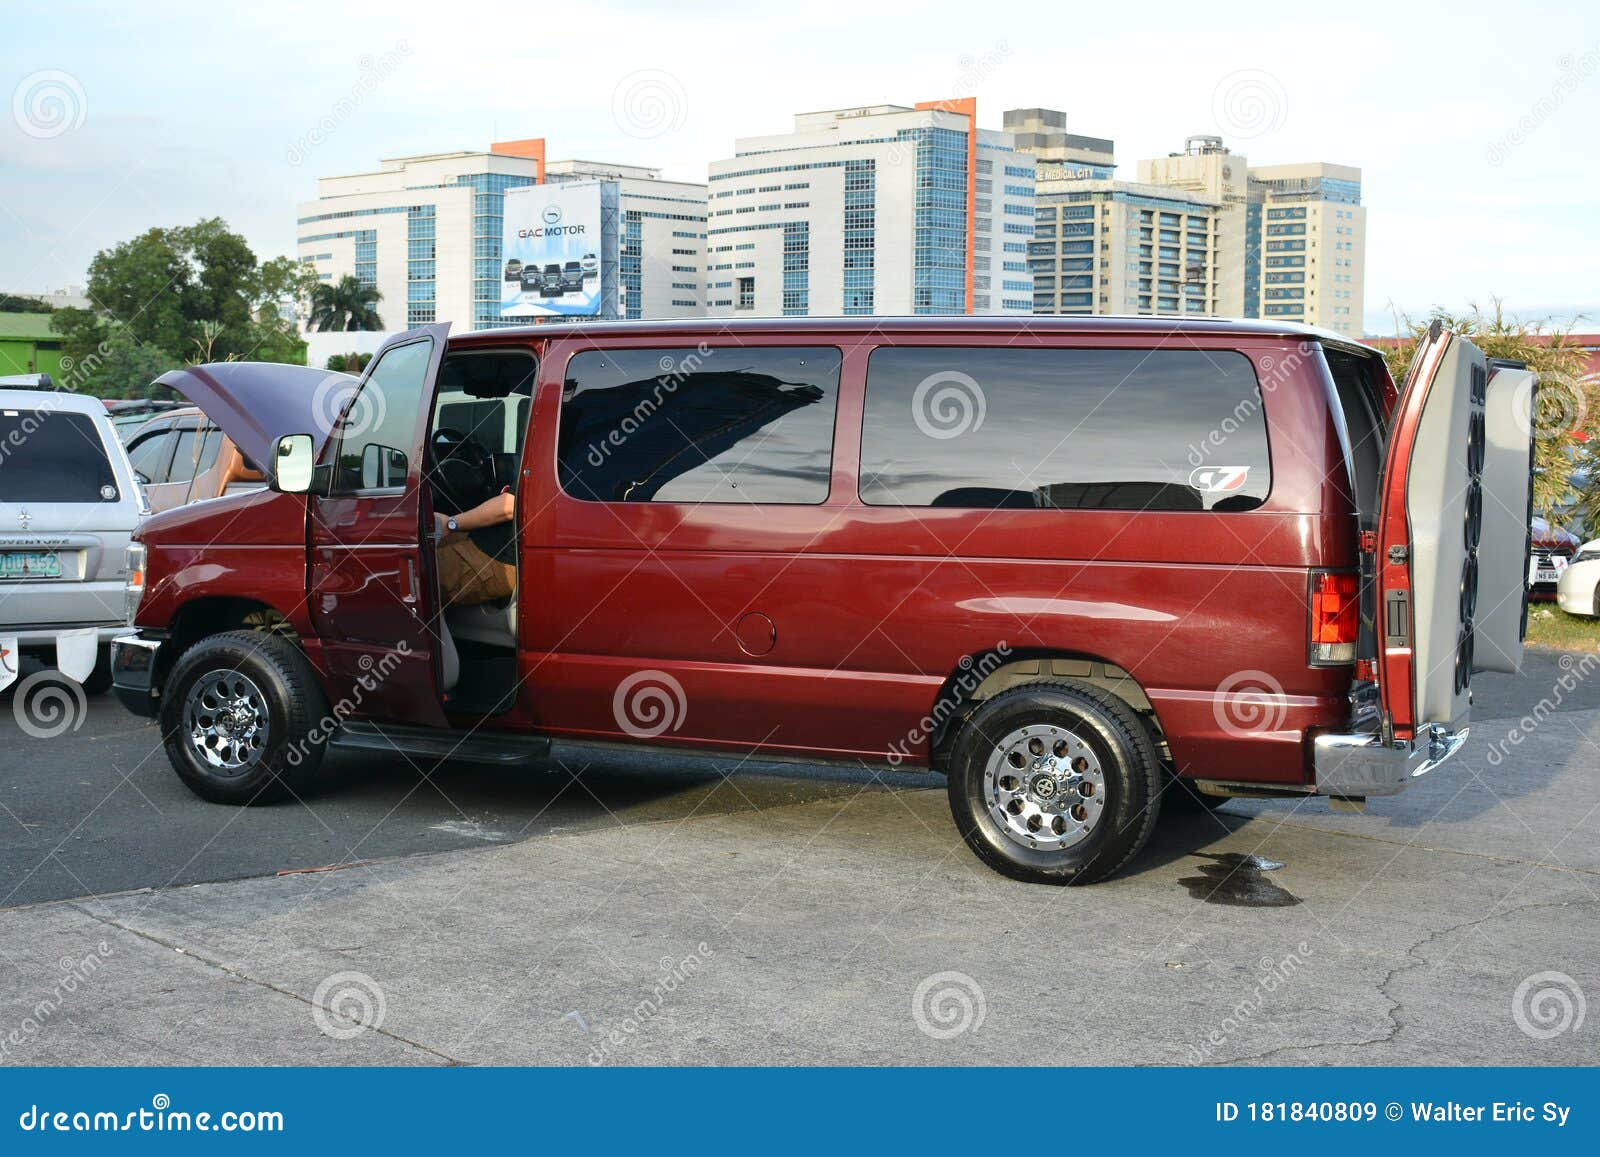 Ford E150 Van At Vapin Wheels Car Show In Pasig Philippines Editorial Stock Image Image Of Expo Metrotent